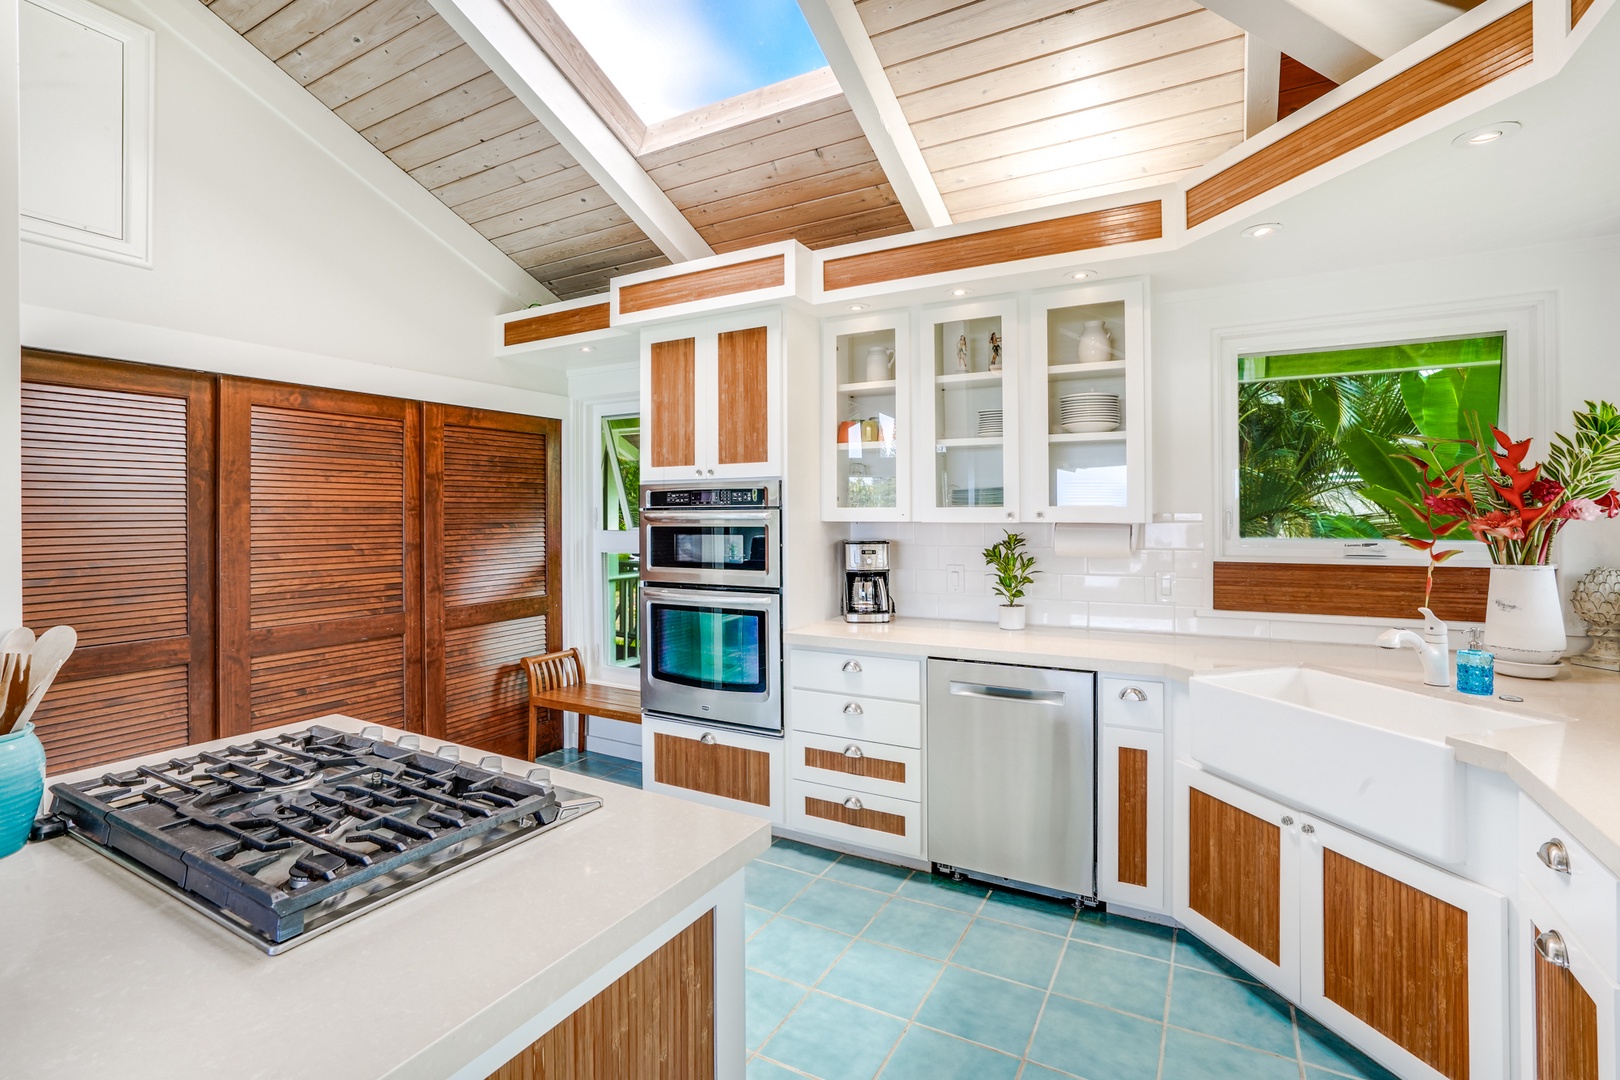 Princeville Vacation Rentals, Wai Lani - Roomy kitchen area with wide counterspace.